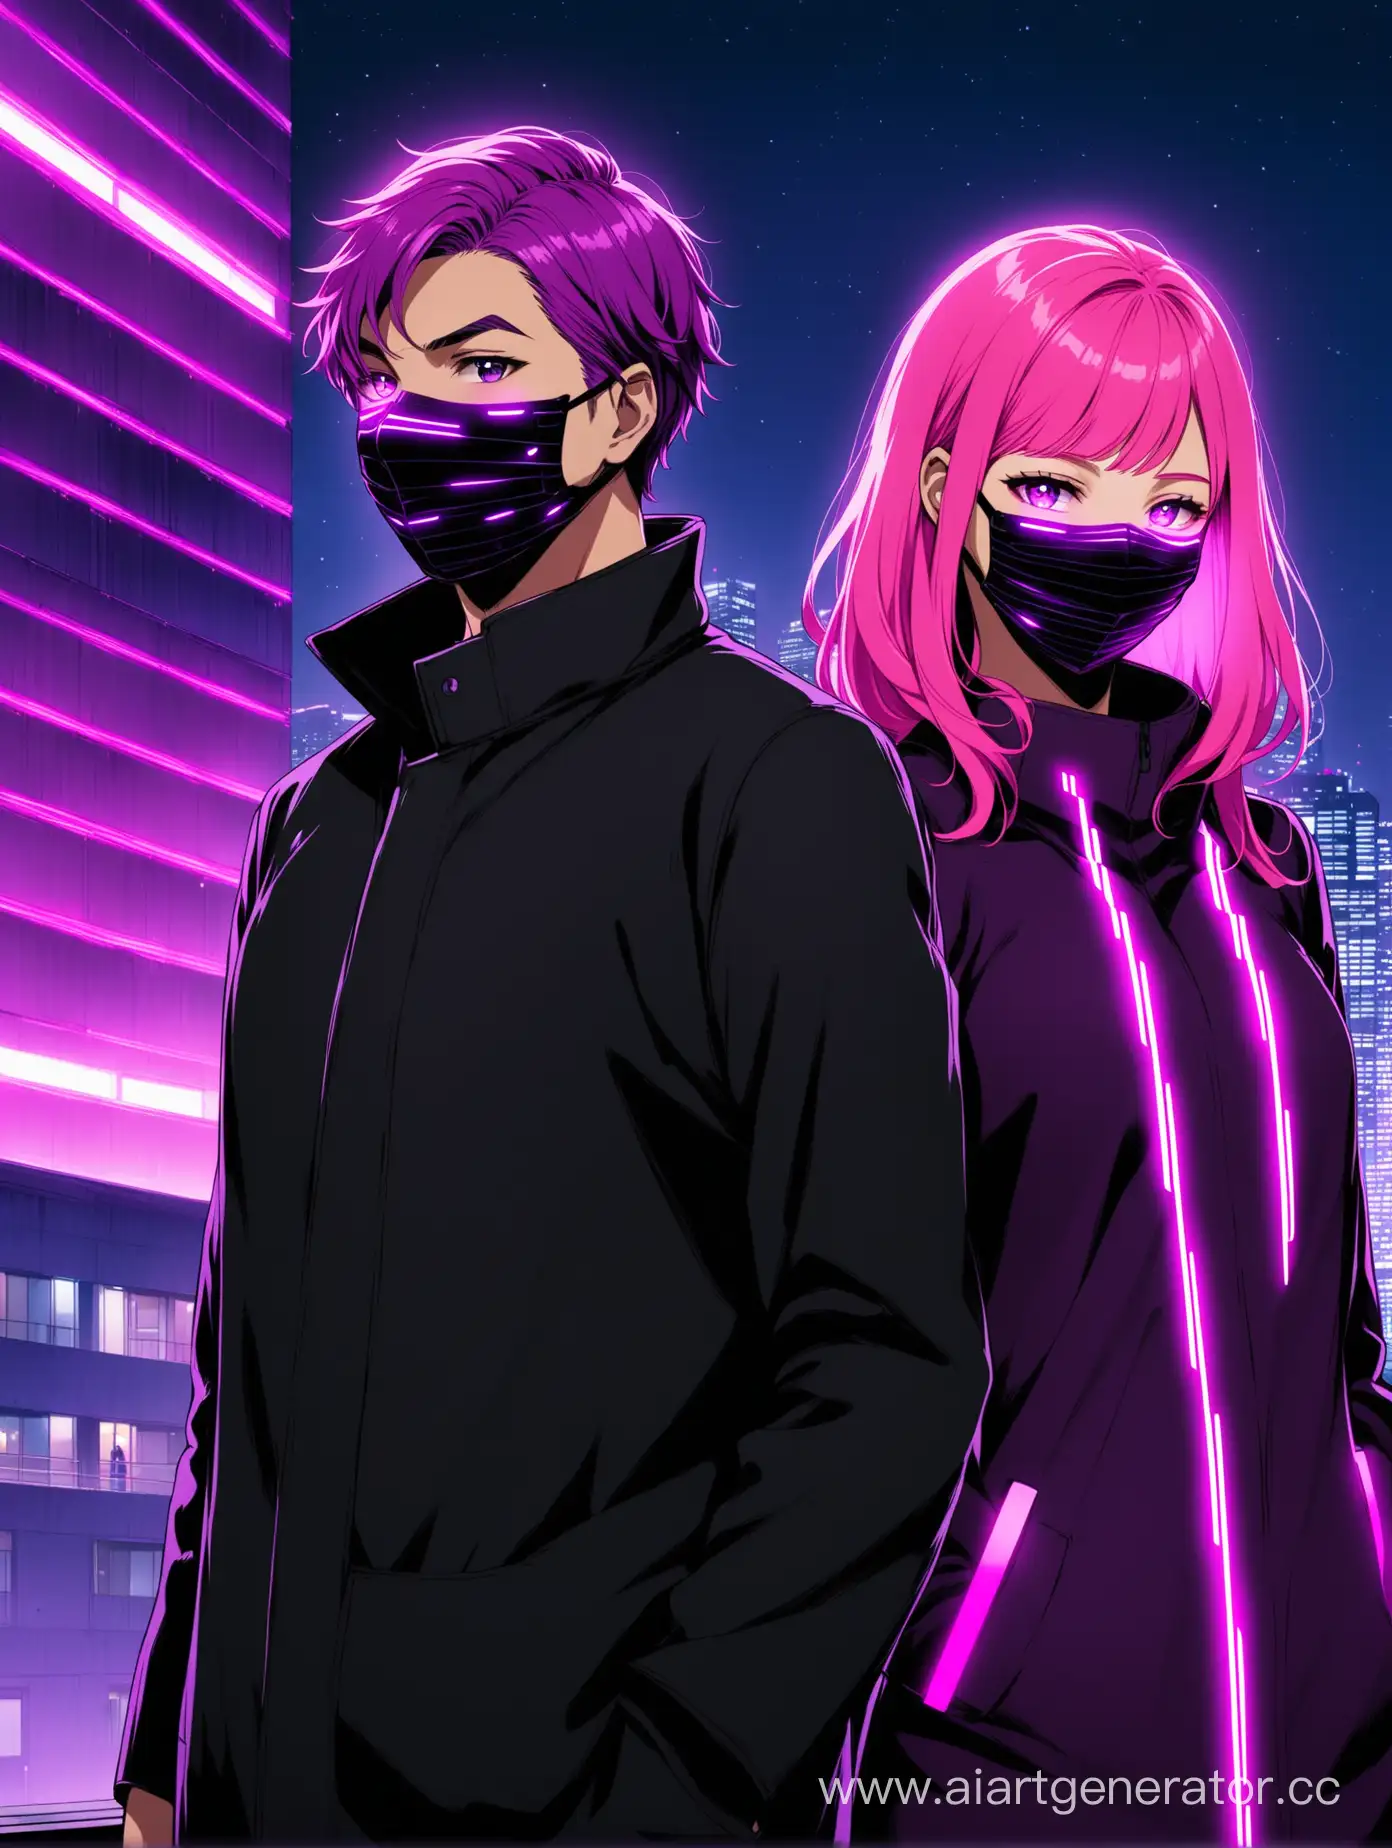 A man and a woman with glowing pink hair wear glowing purple face masks. They are standing next to each other with a building in the background.